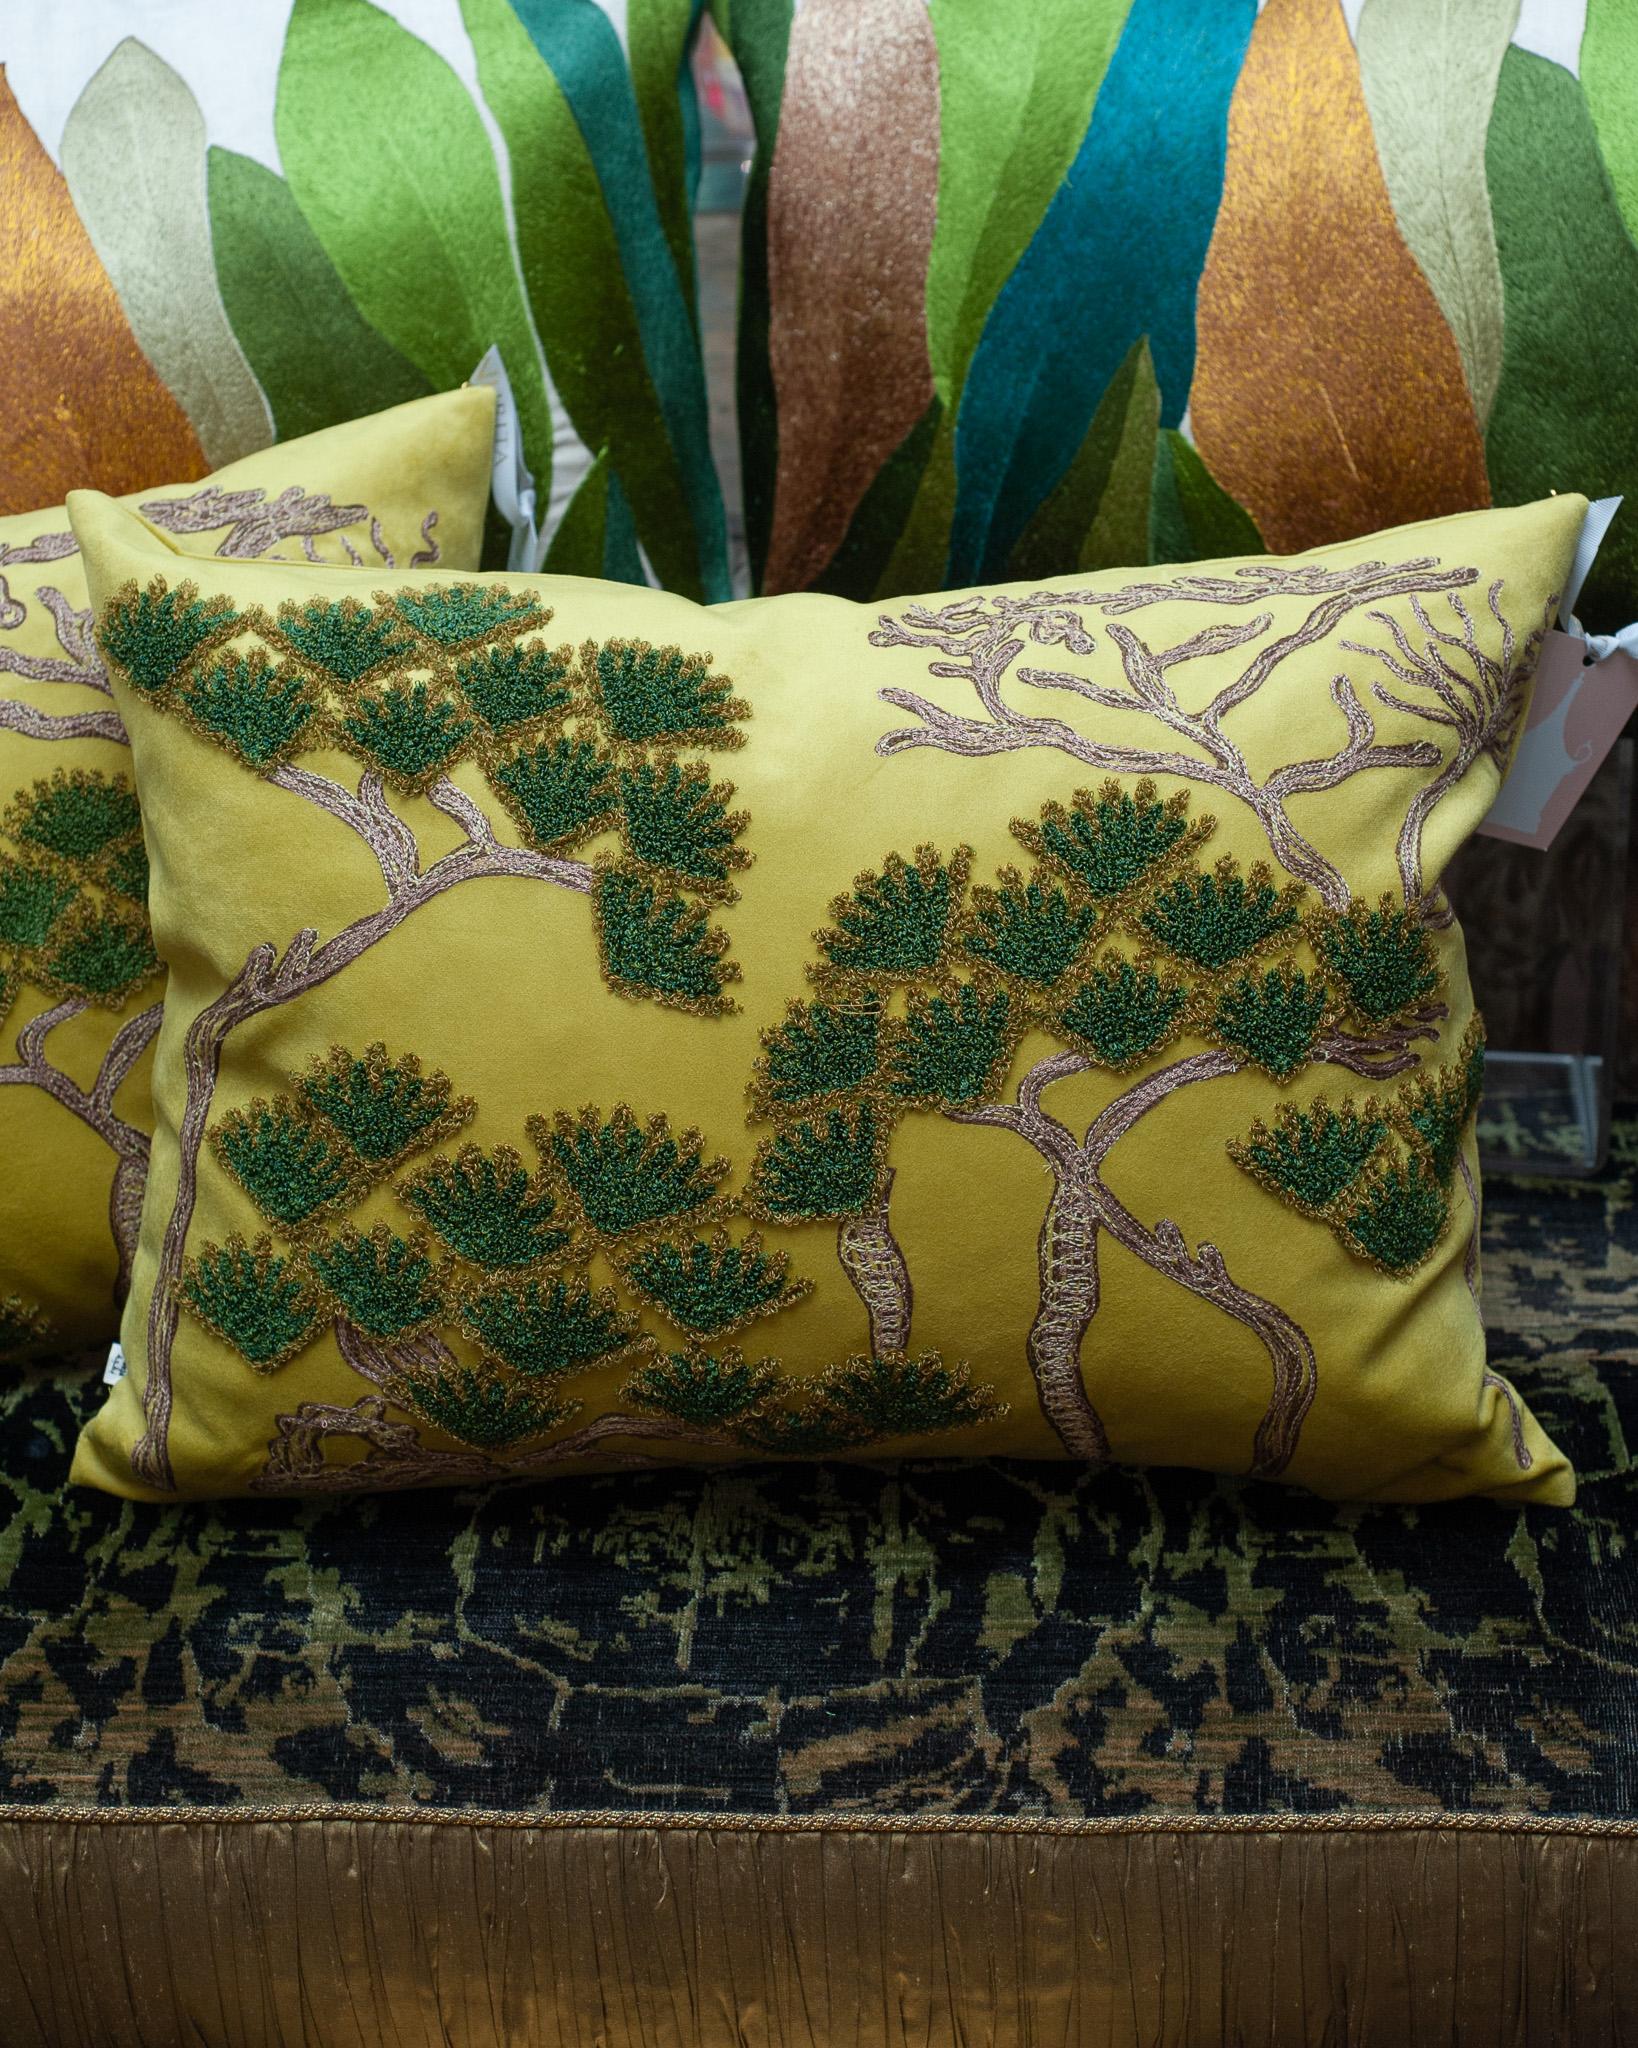 A beautiful large embroidered pillow with pine tress, ornately embroidered in a combination of thicknesses of coloured thread on an ultrasuede backing. Casual yet elegant, a new pair of pillows can transform a space with a modest investment. 